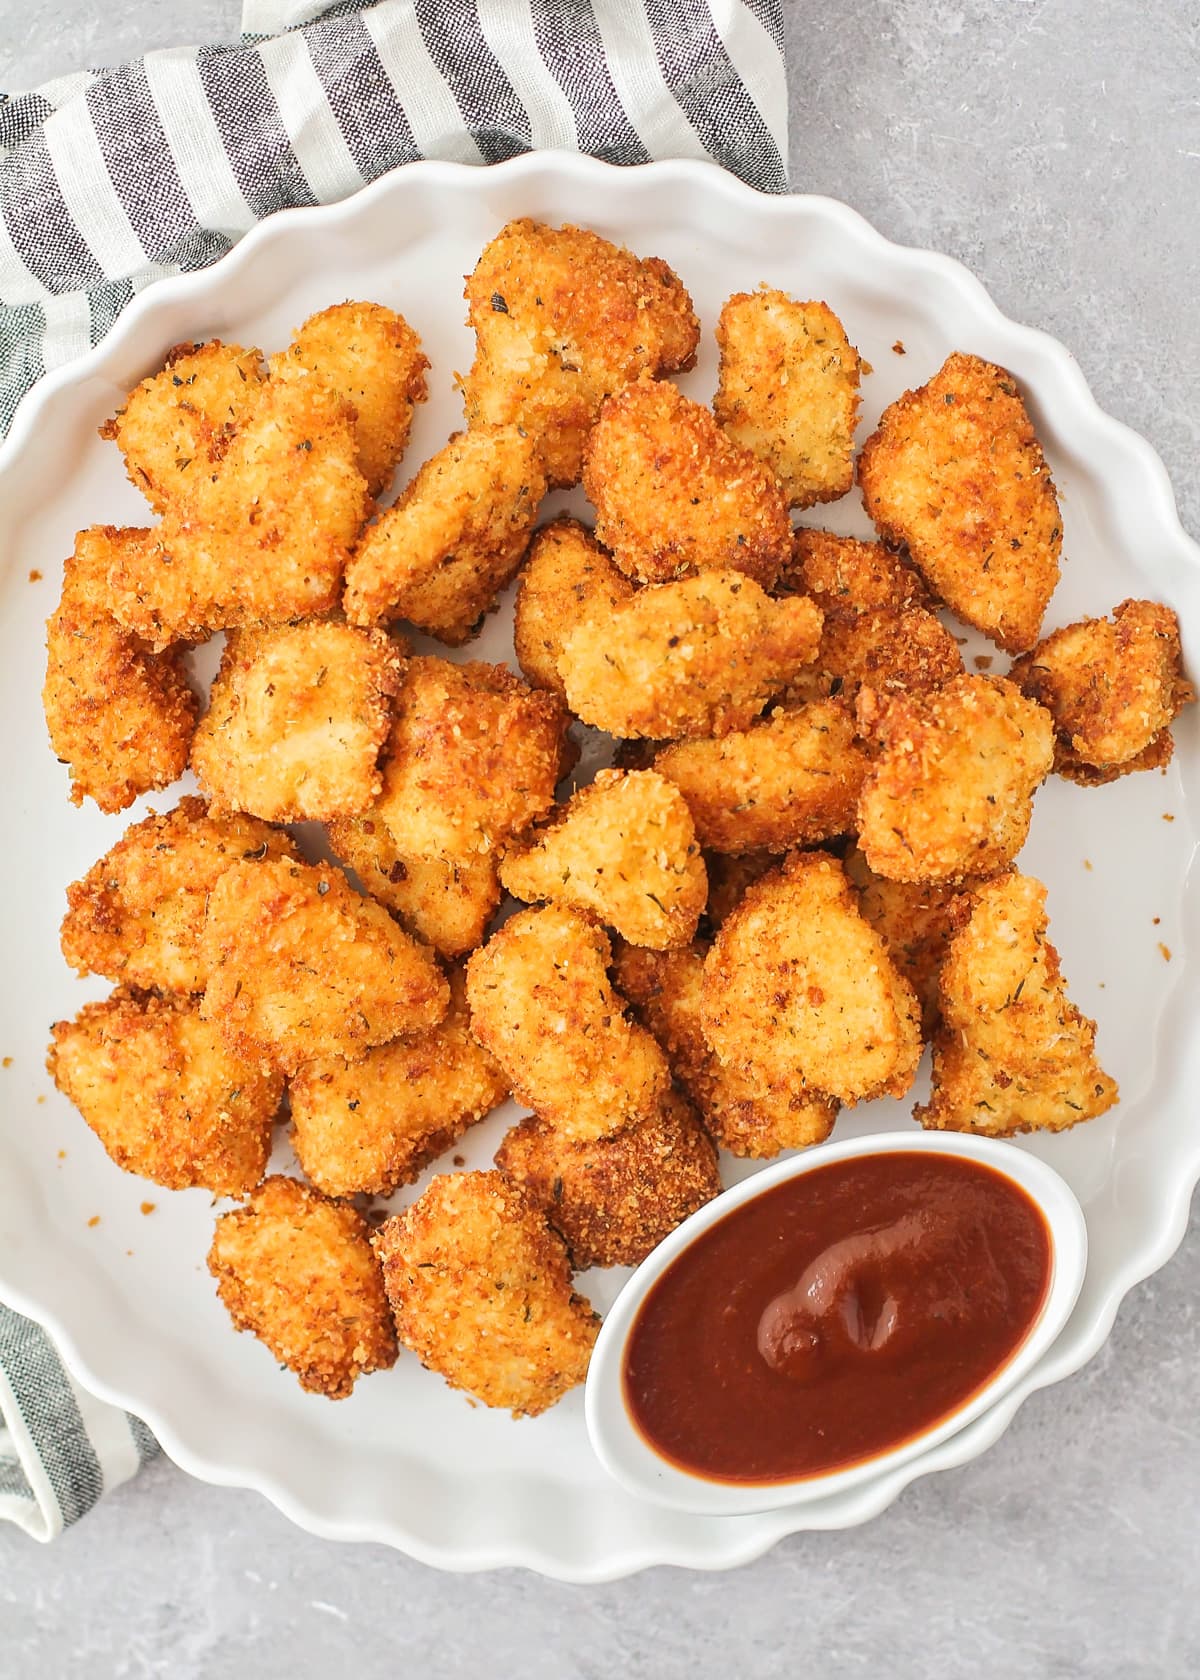 Homemade chicken nuggets recipe on plate with sauce.